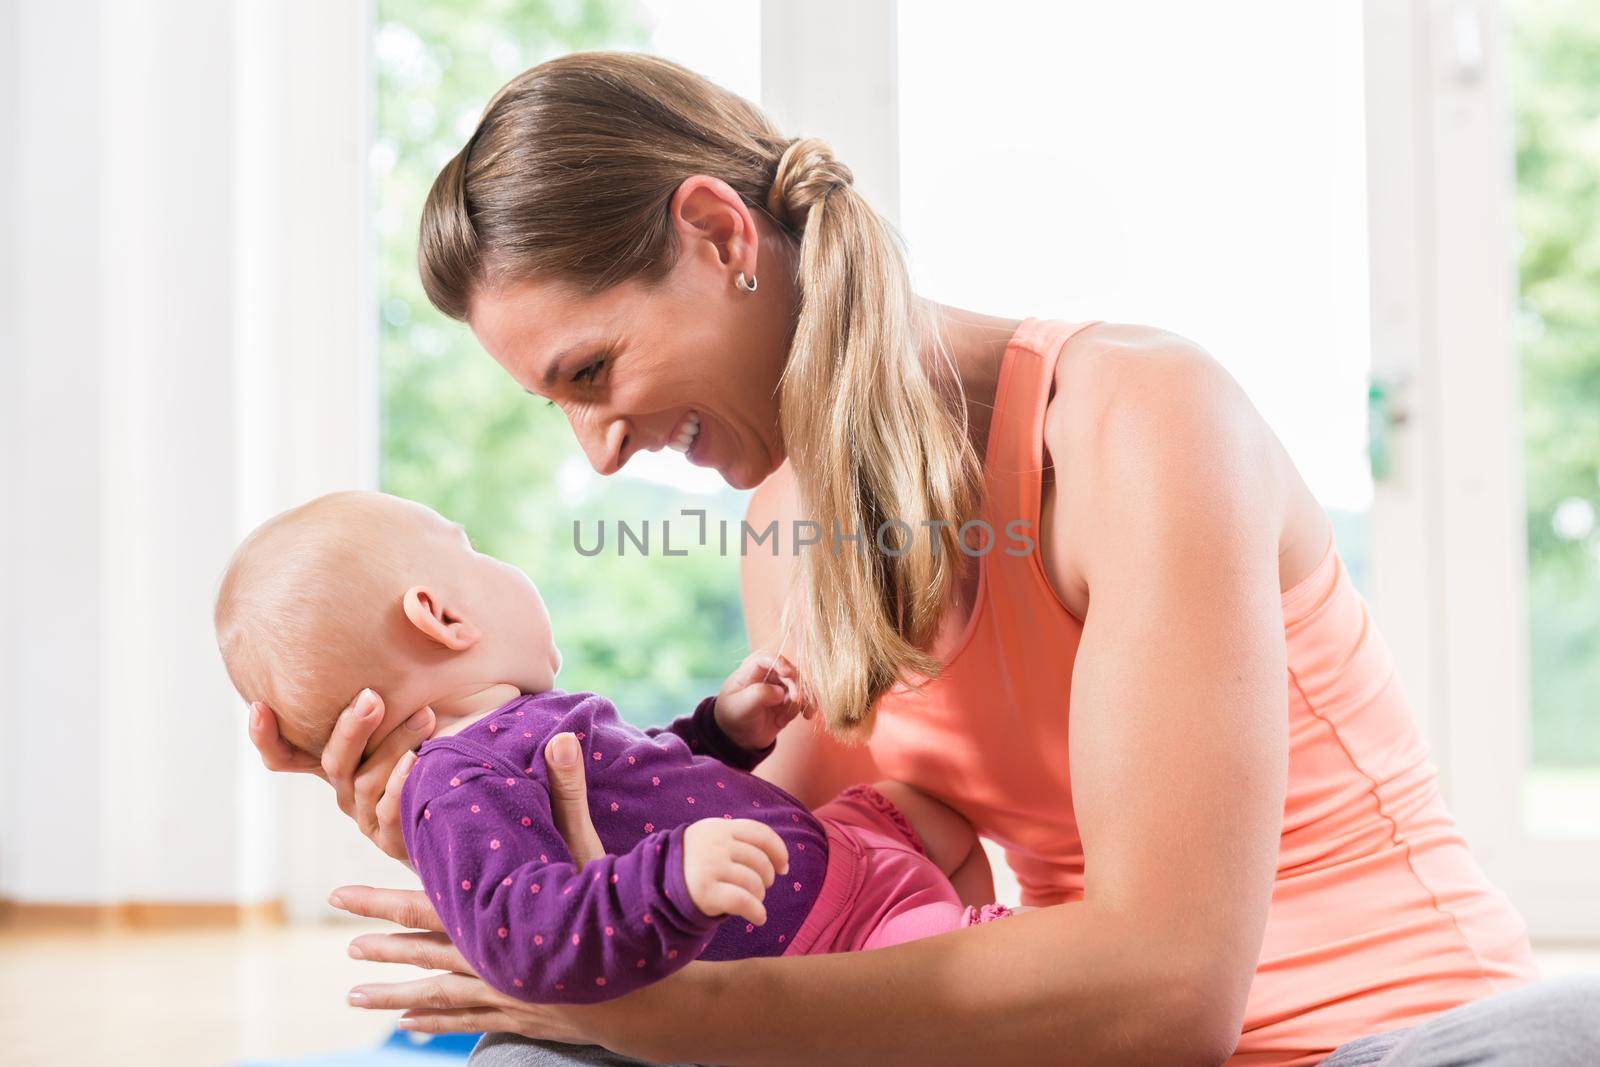 Mom and newborn baby playing together in baby course by Kzenon